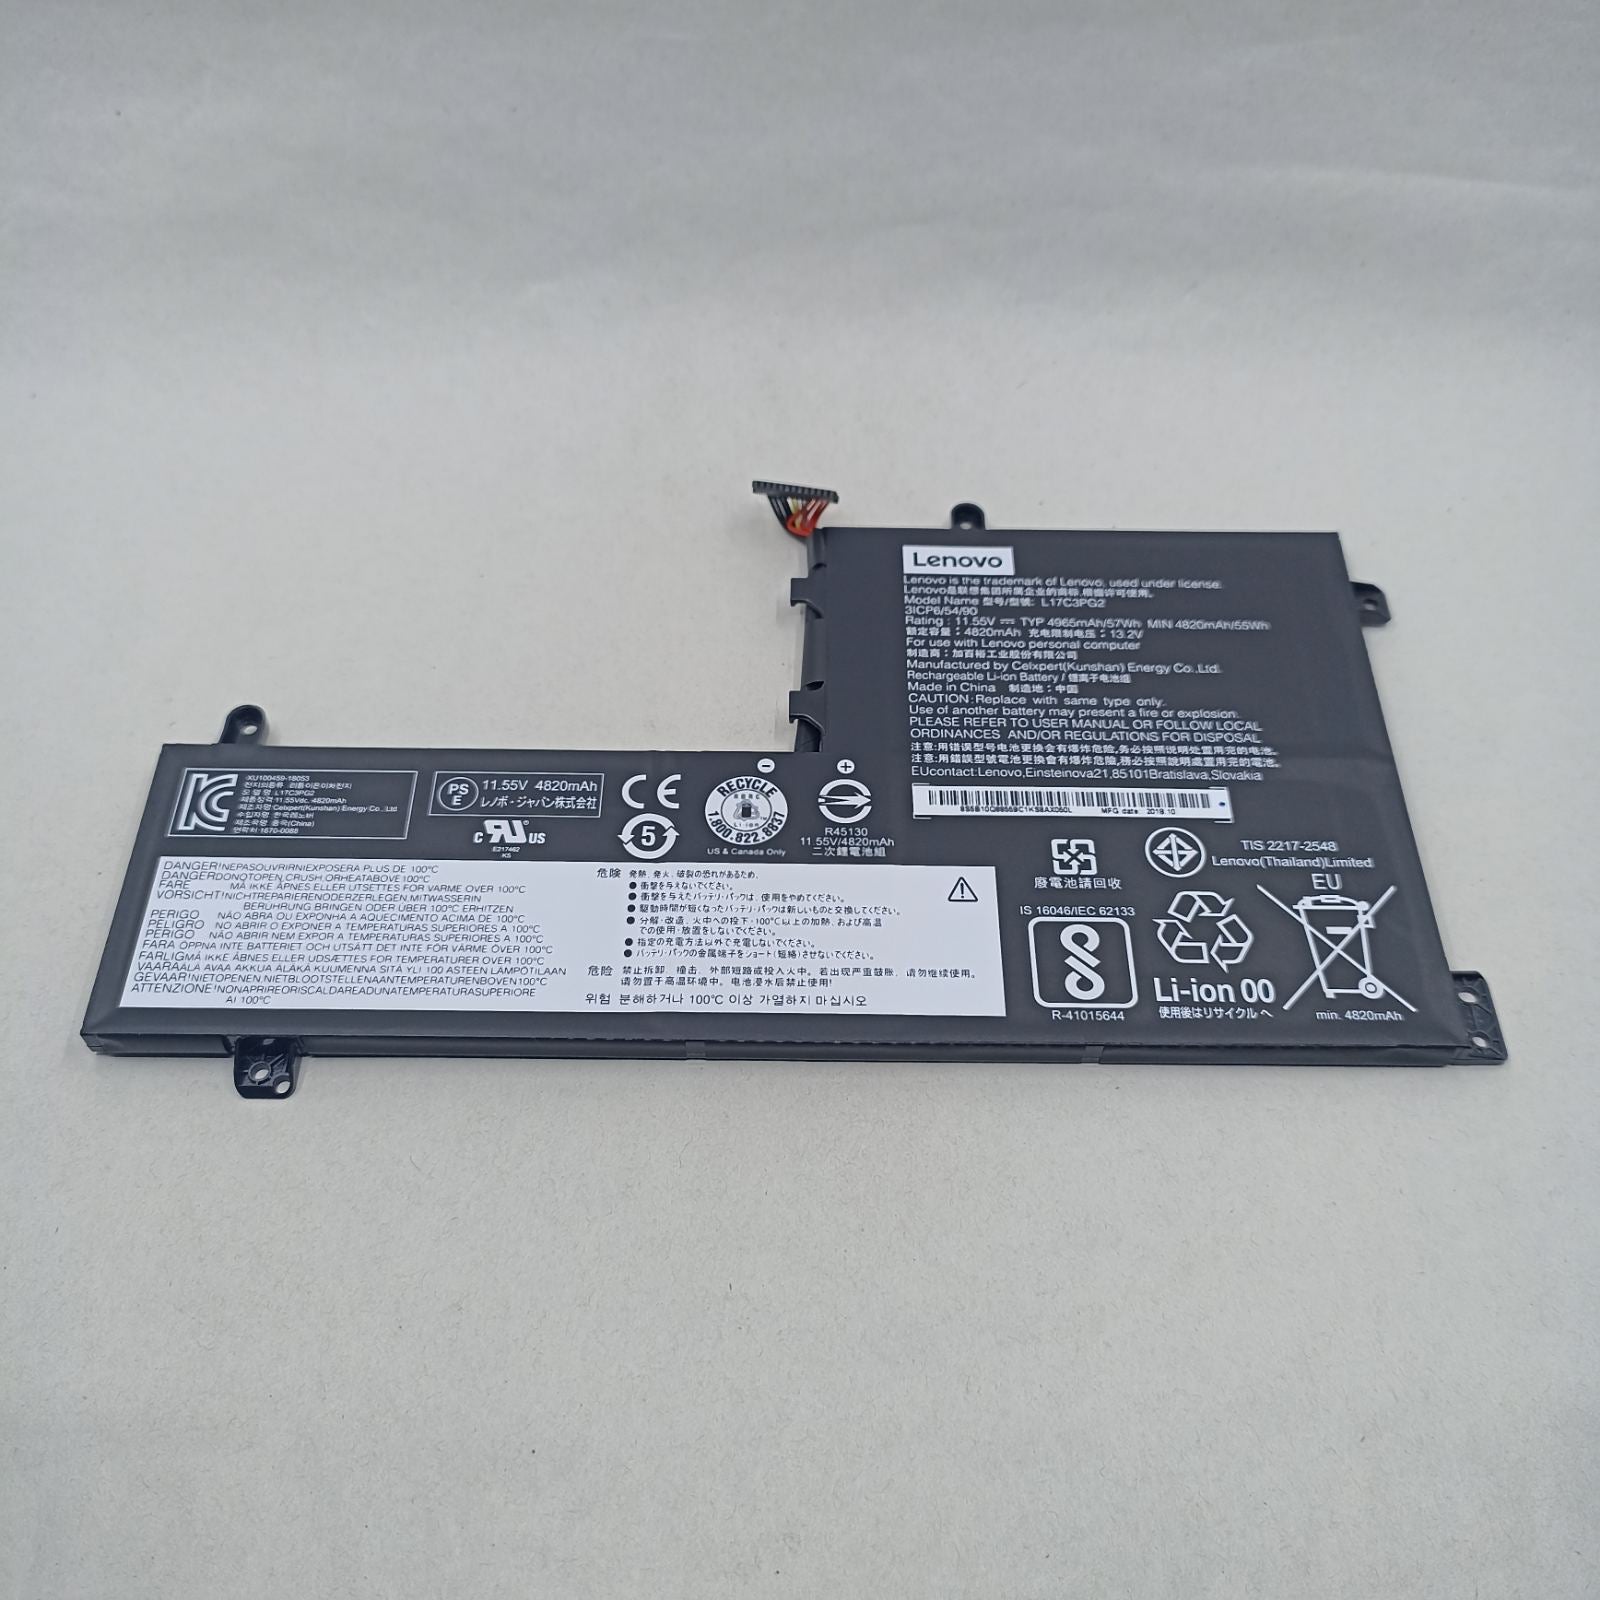 Replacement Battery for Lenovo Legion Y730-15ICH A1